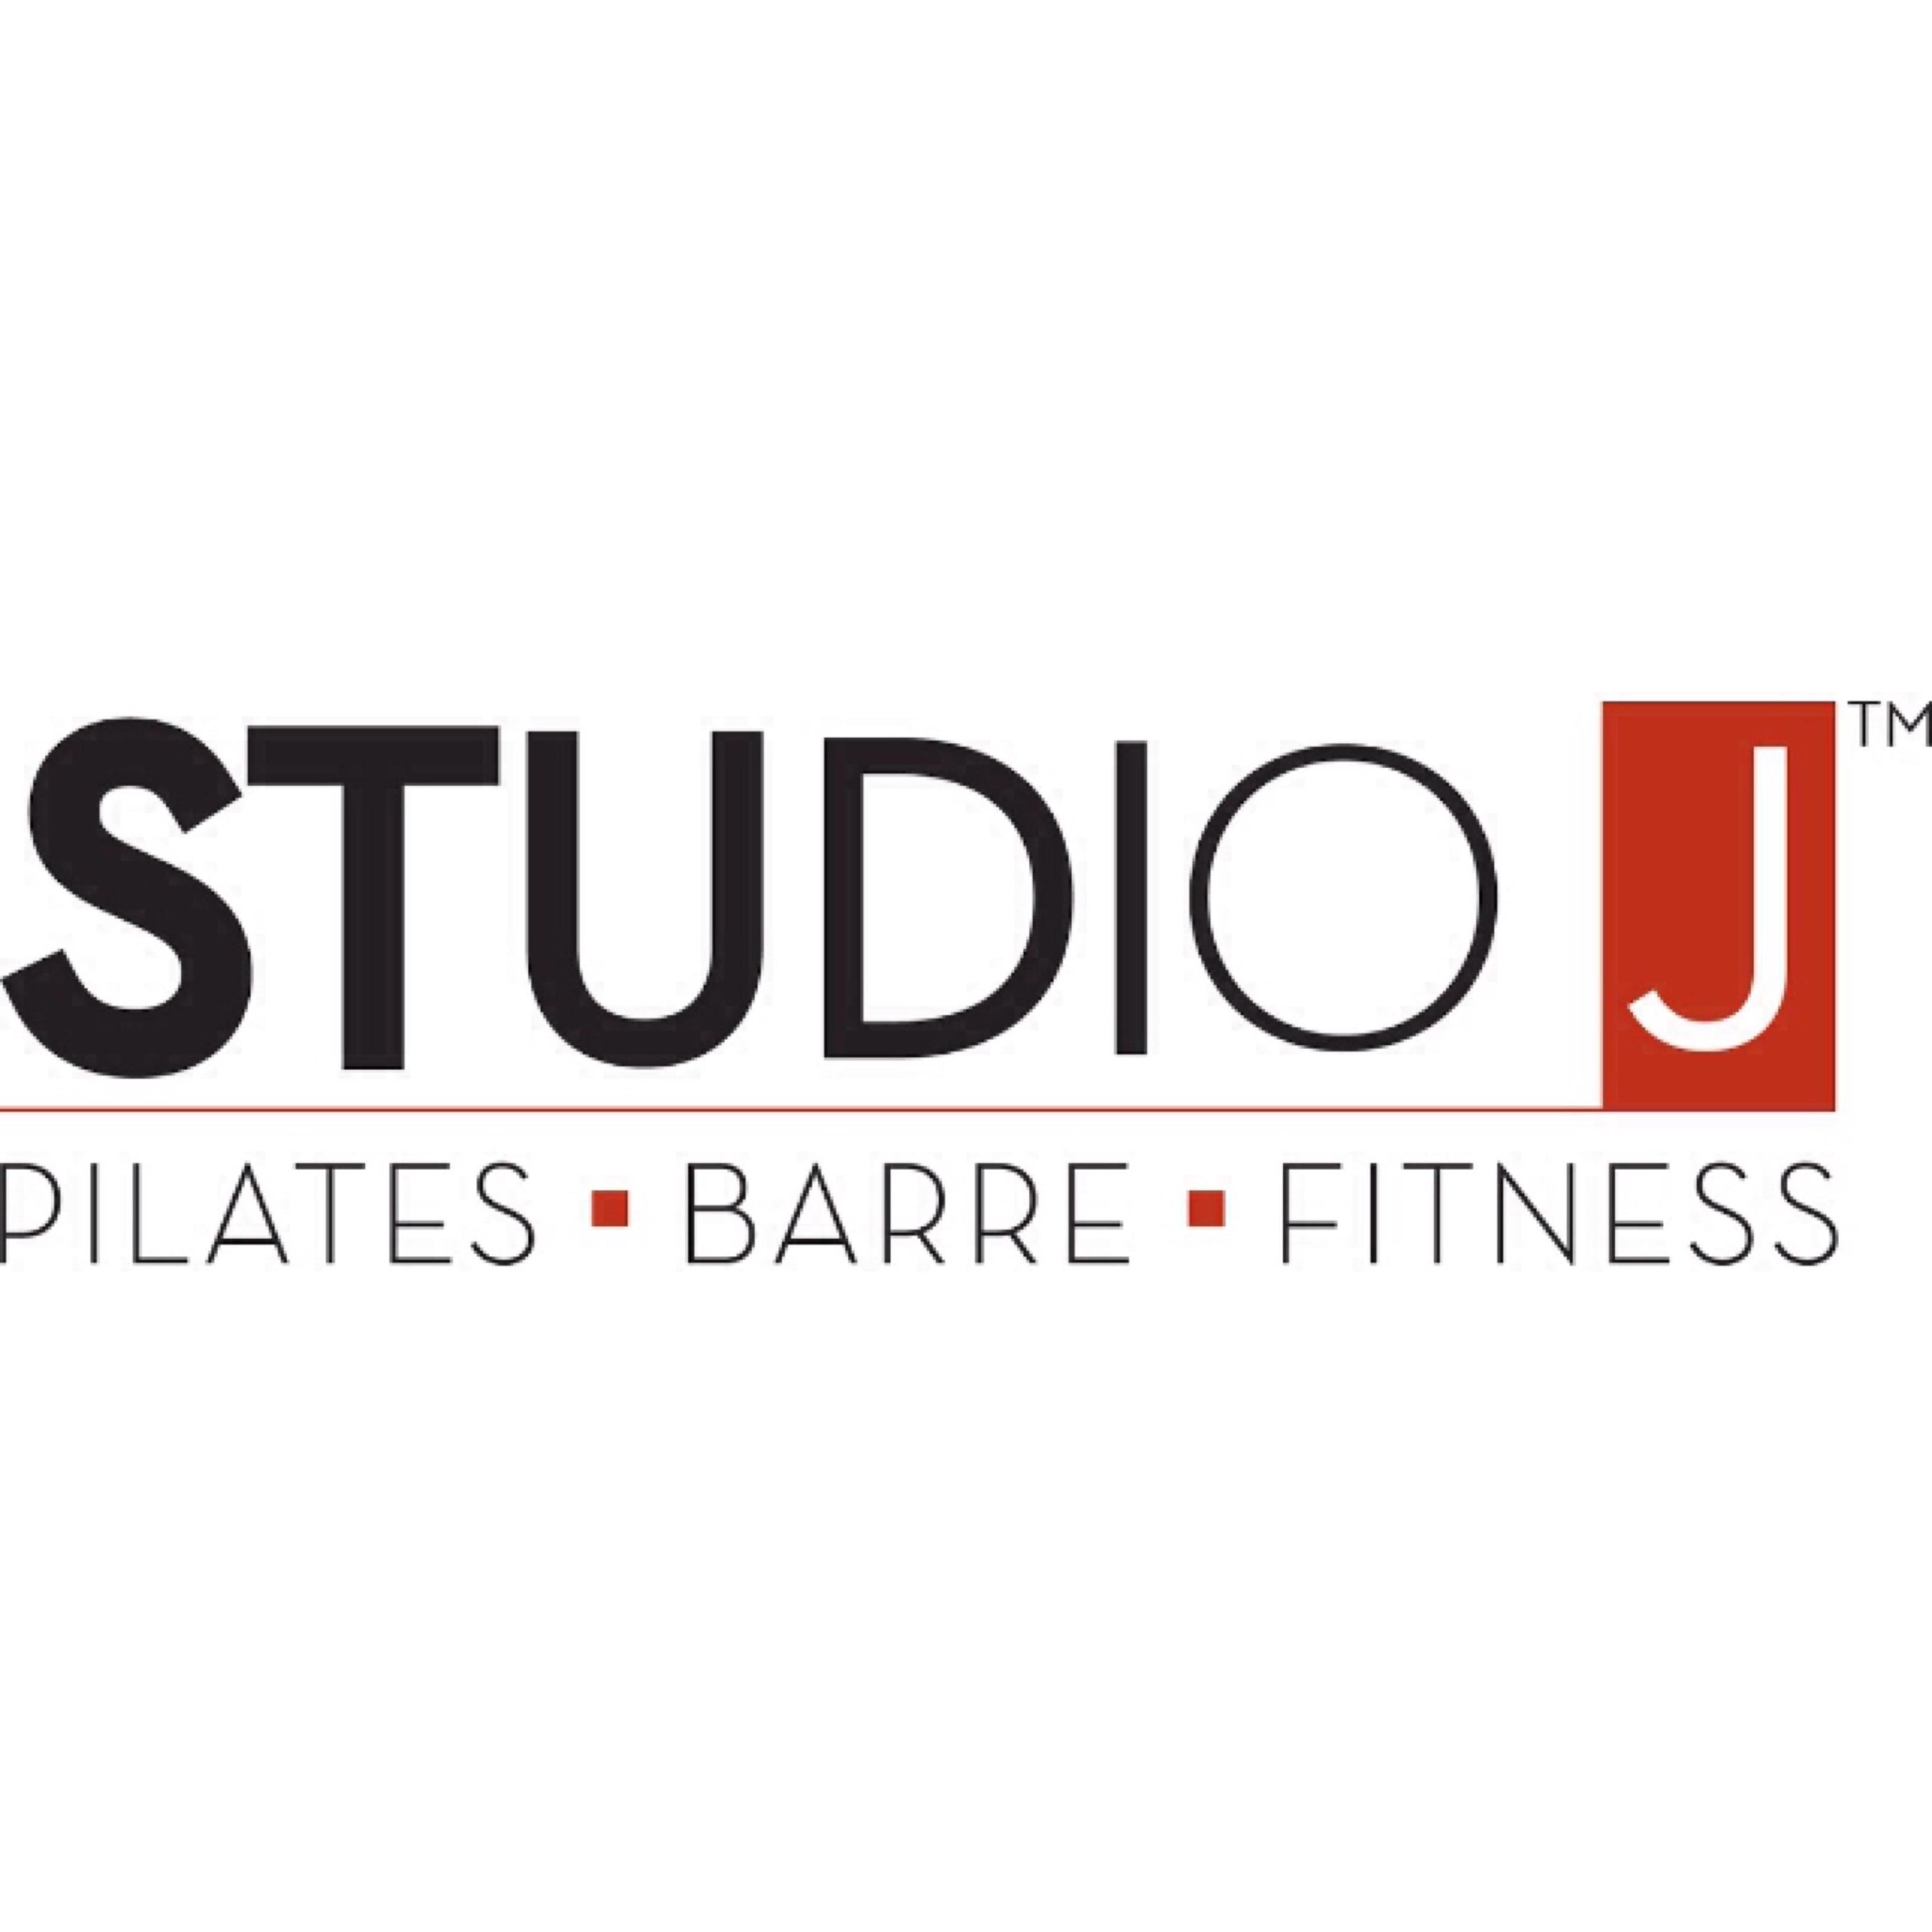 We offer Pilates, Yoga, TRX, Barre and we have a state-of-the-art Reformer studio.